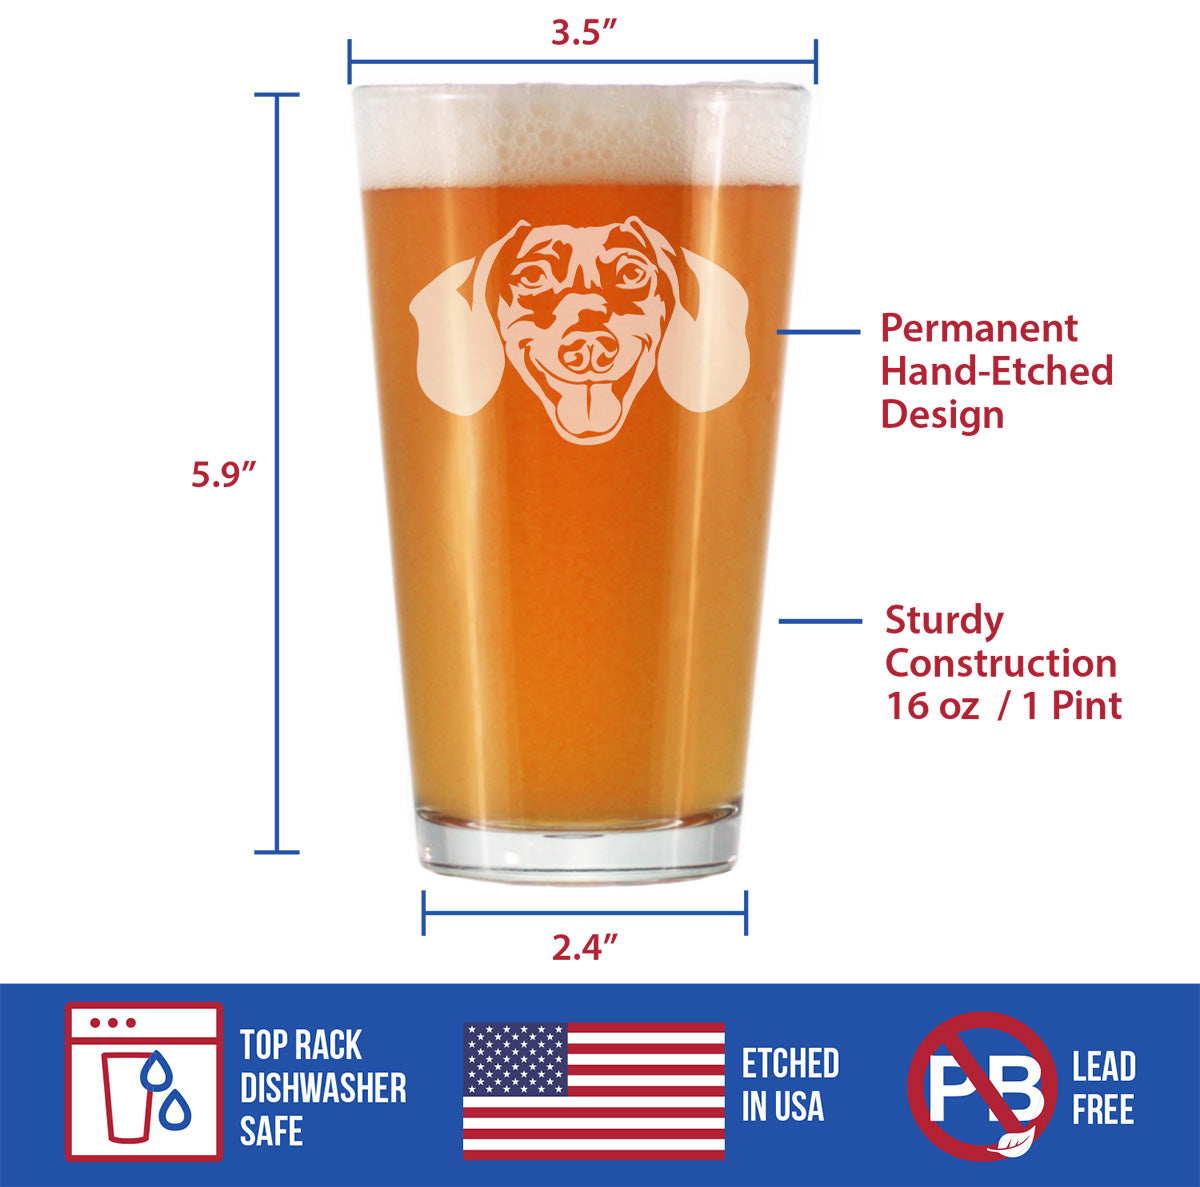 Dachshund Face Pint Glass for Beer - Unique Dog Themed Decor and Gifts for Moms &amp; Dads of Dachshunds - 16 Oz